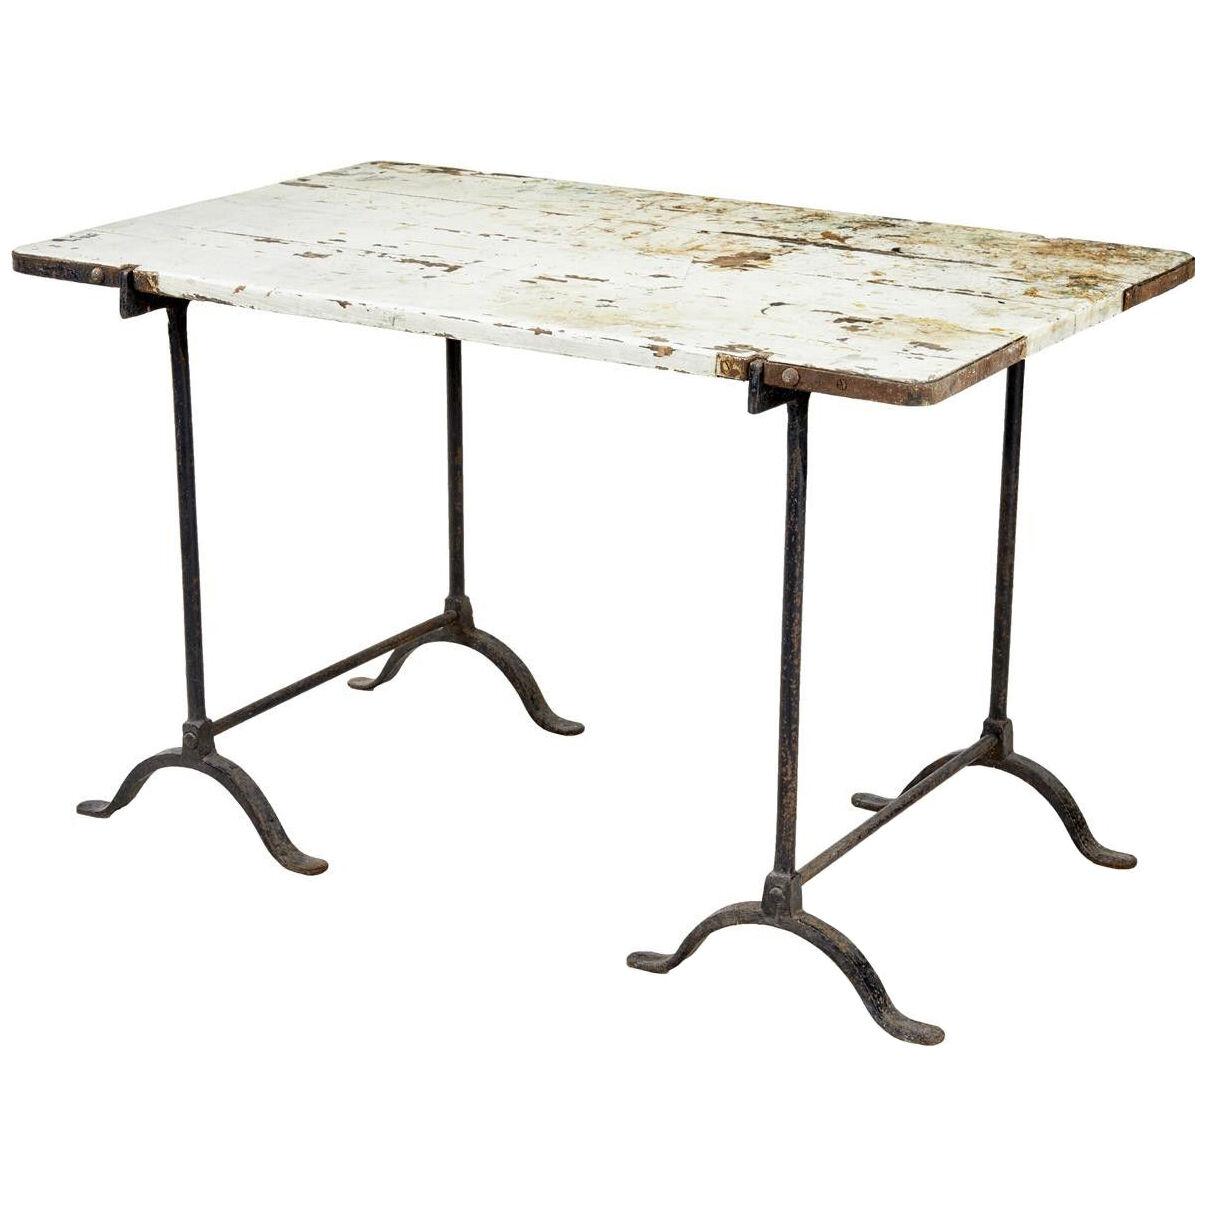 EARLY 20TH CENTURY PINE AND IRON TRESTLE WORK TABLE